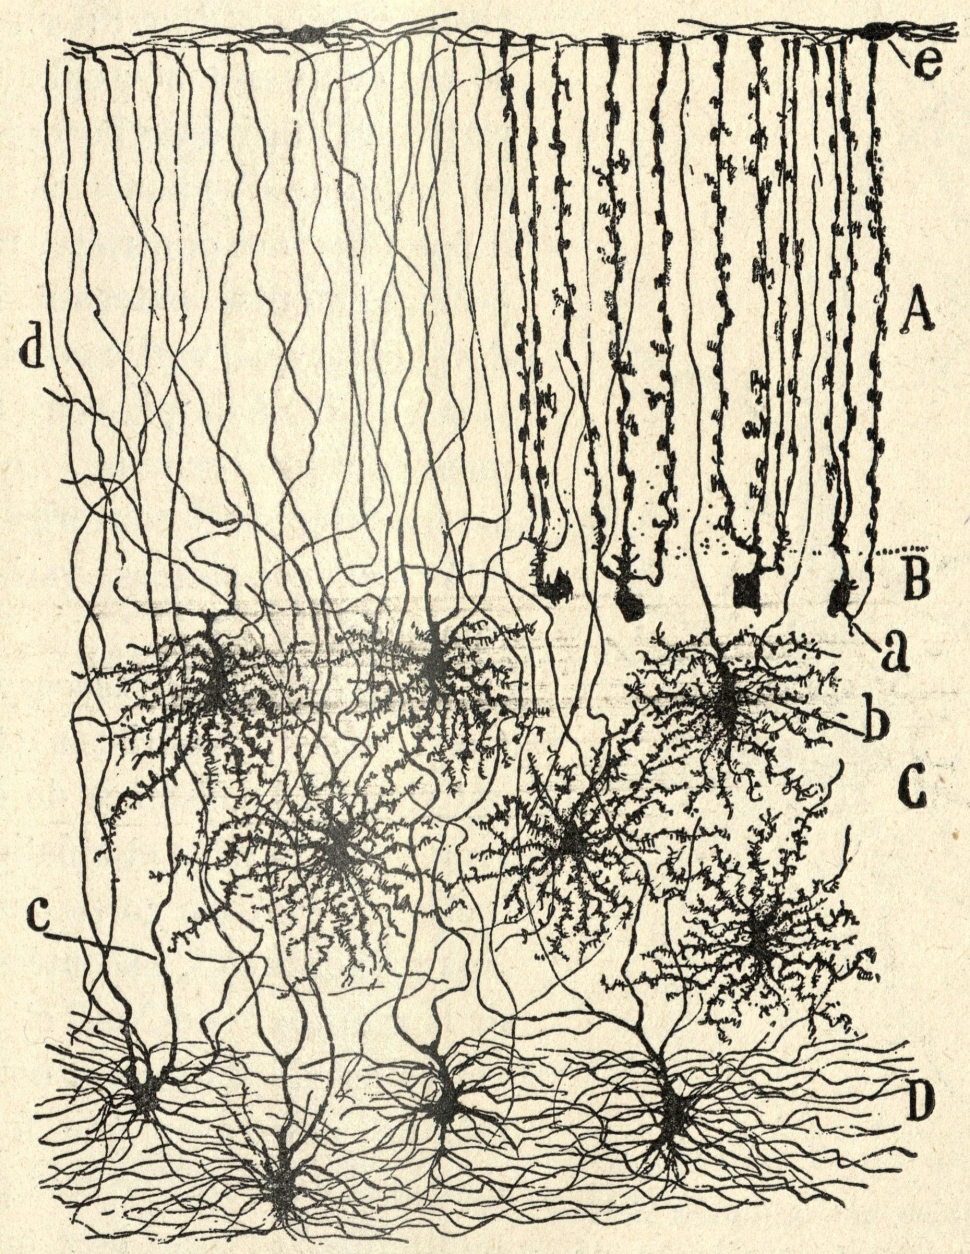 Illustration of human cerebellum nerve cells, stringy or spidery masses with a central focal point